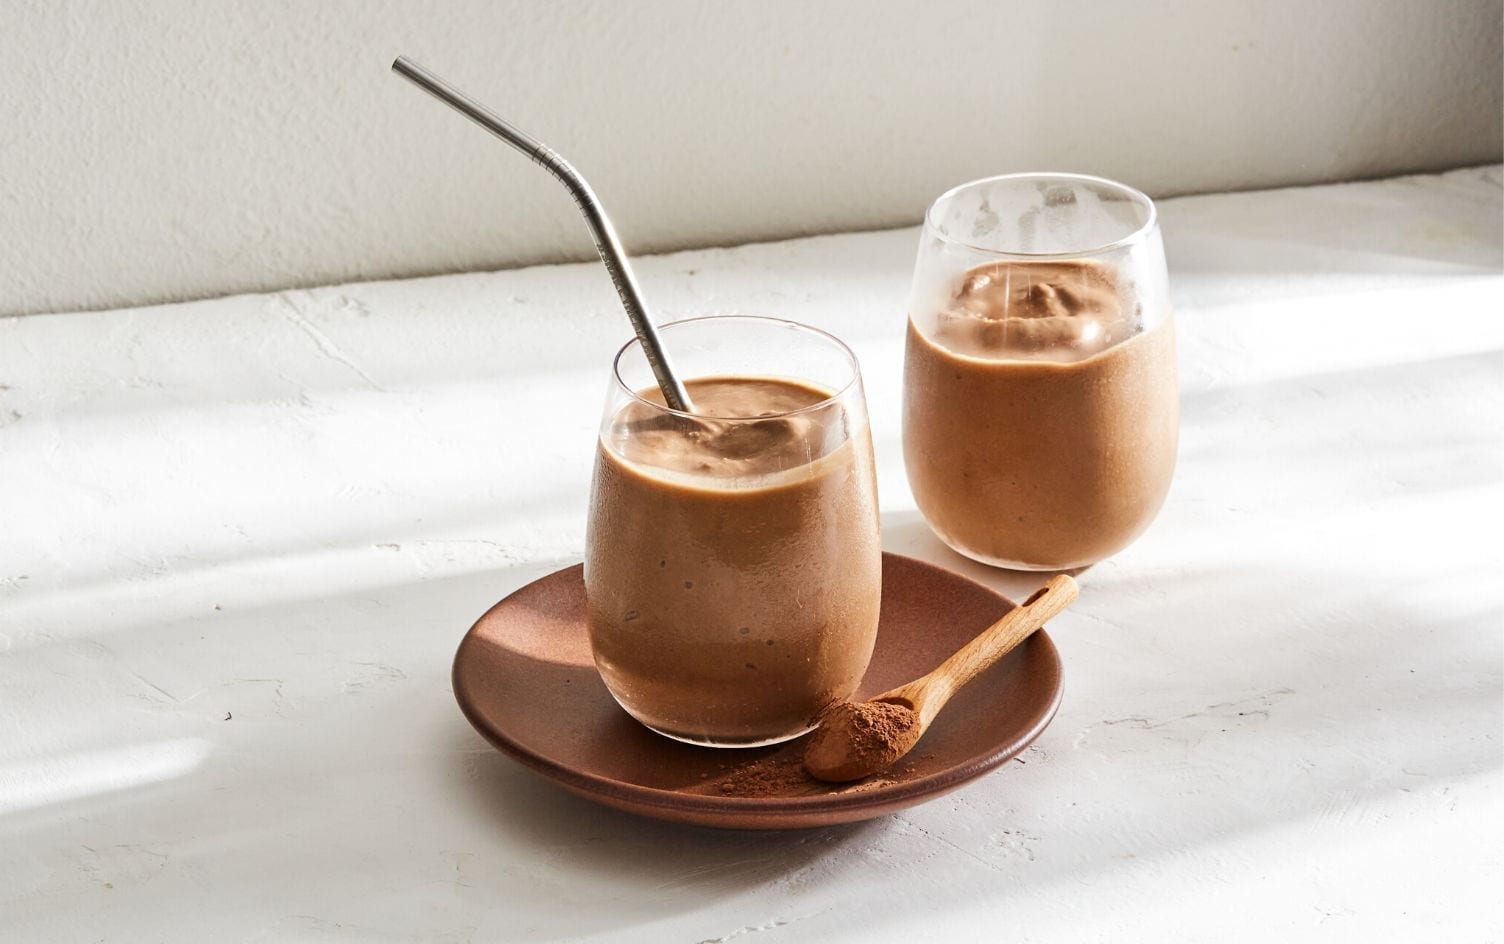 Chocolate, Avocado and Olive Oil Smoothie